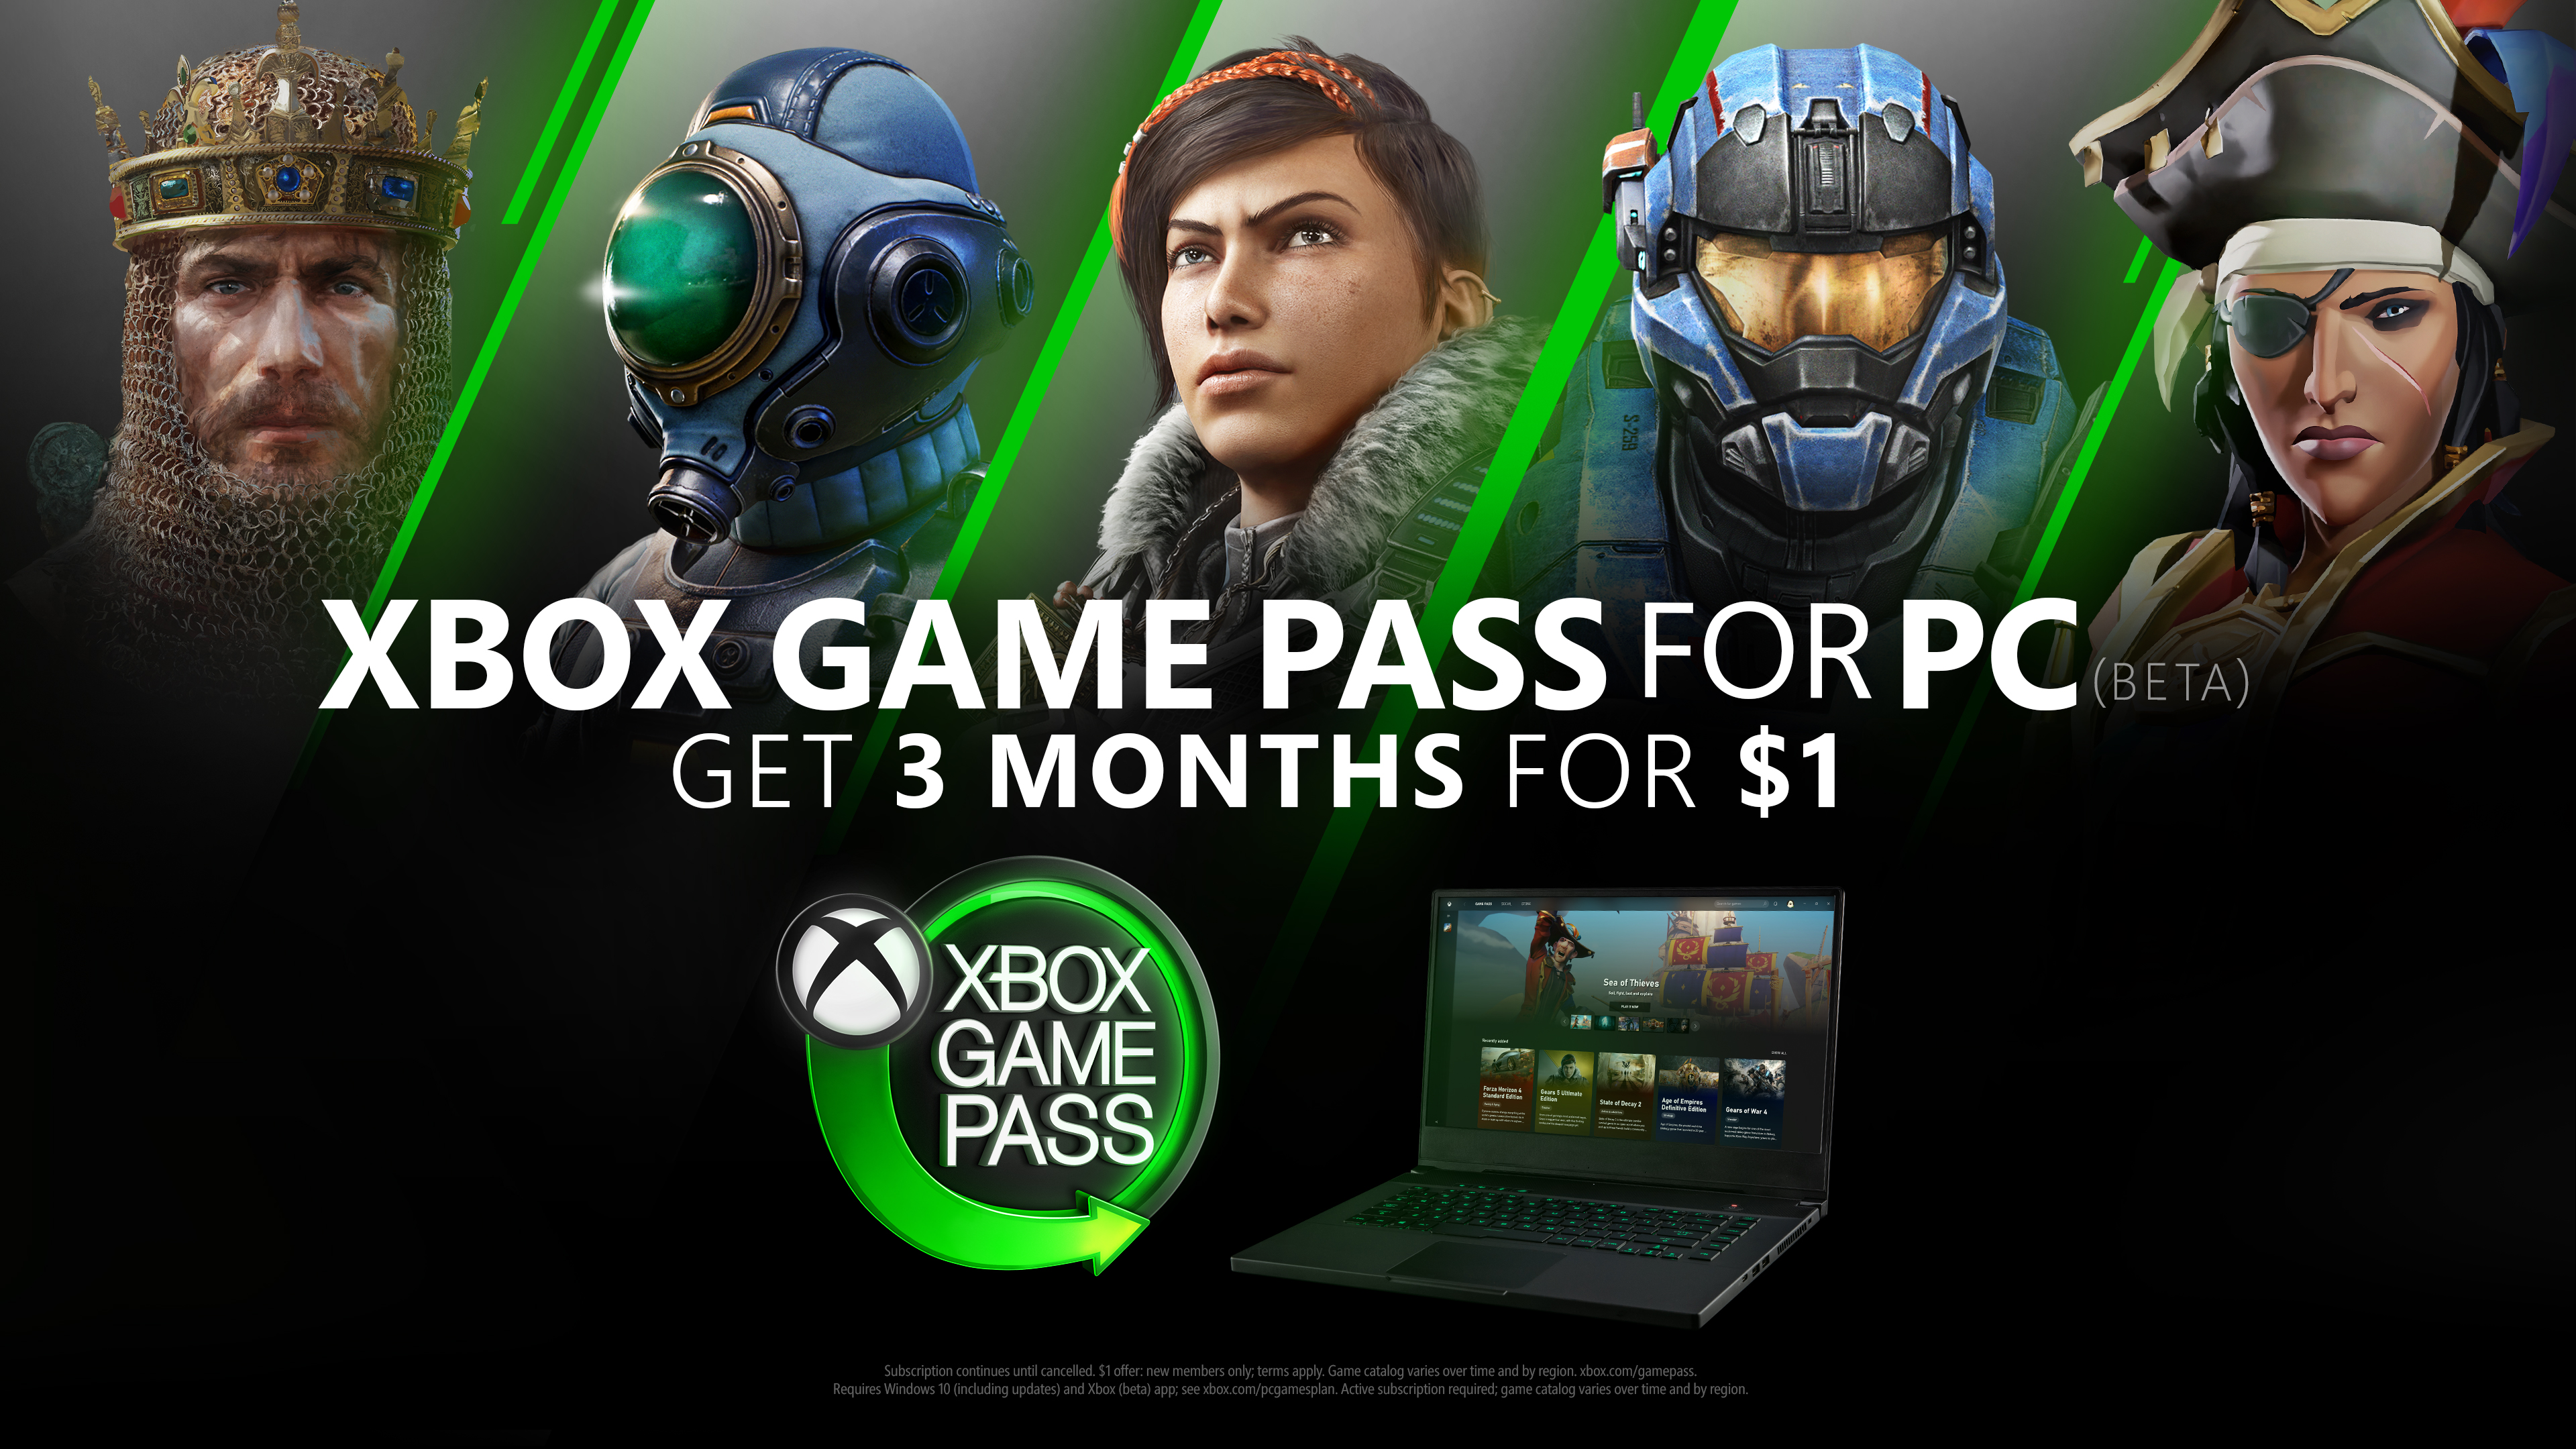 Gears 5 Game of the Year Edition for Xbox Game Pass PC - Gamepassta